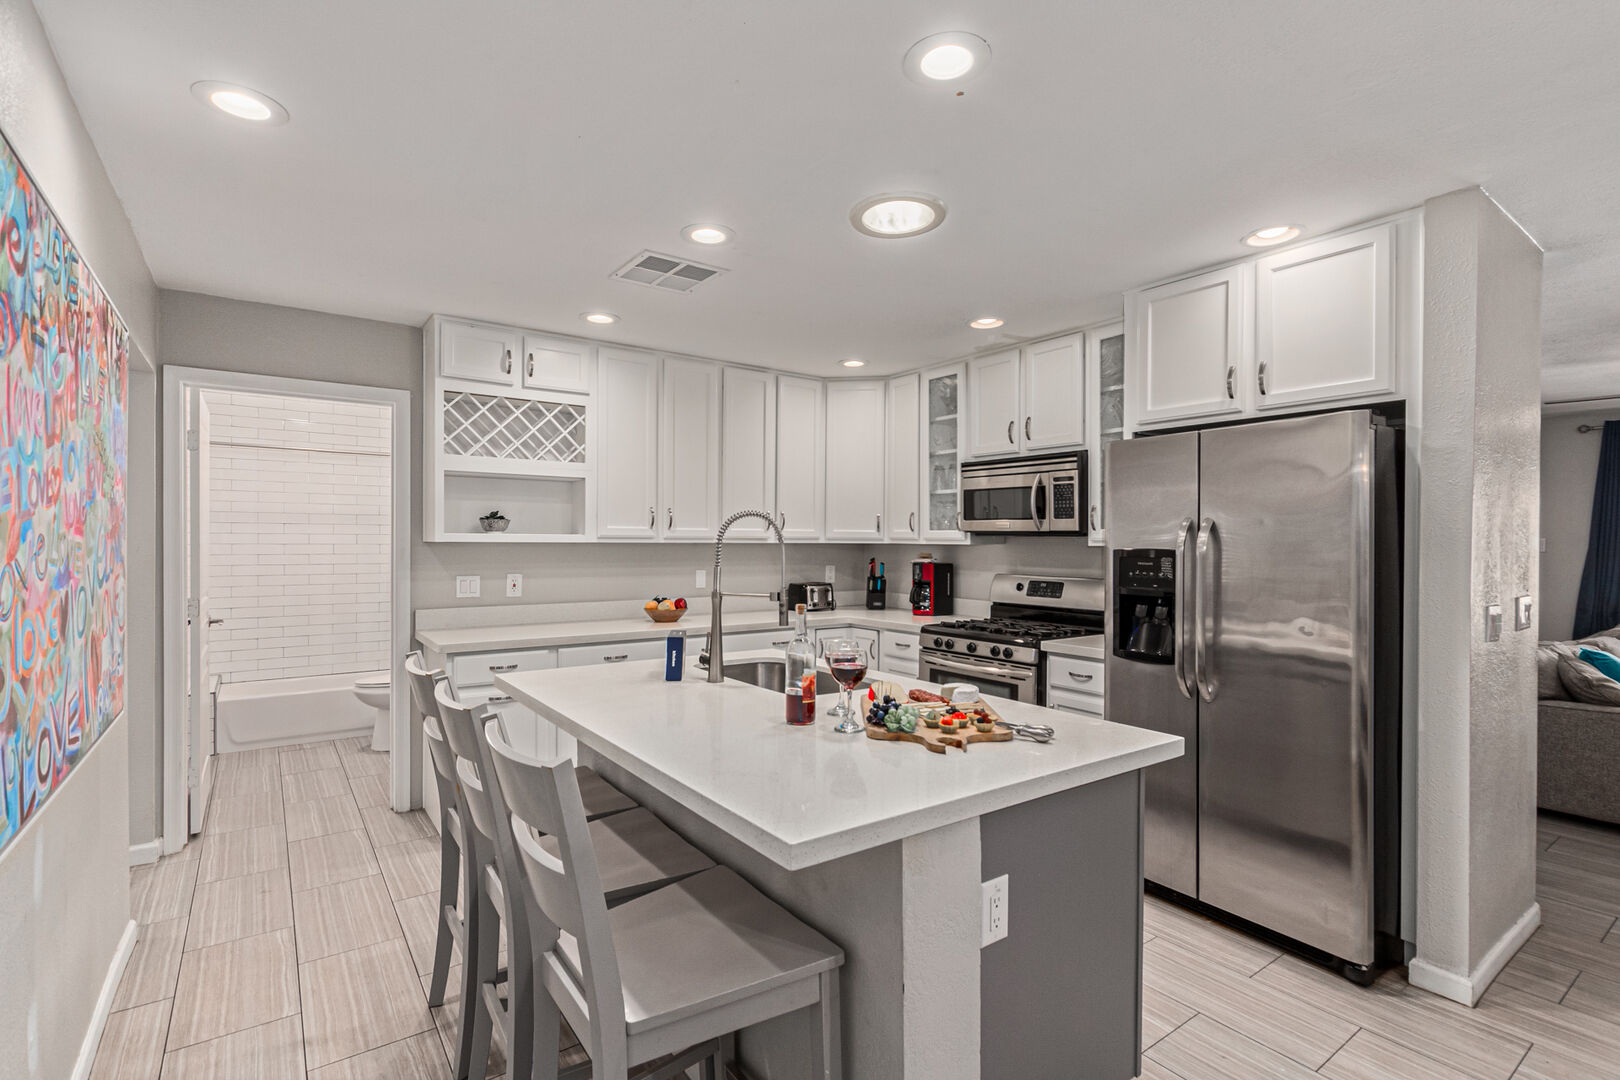 Fully Equipped Kitchen stocked with your basic cooking essentials and stainless-steel appliances, connected to the Dining Room with ample seating.